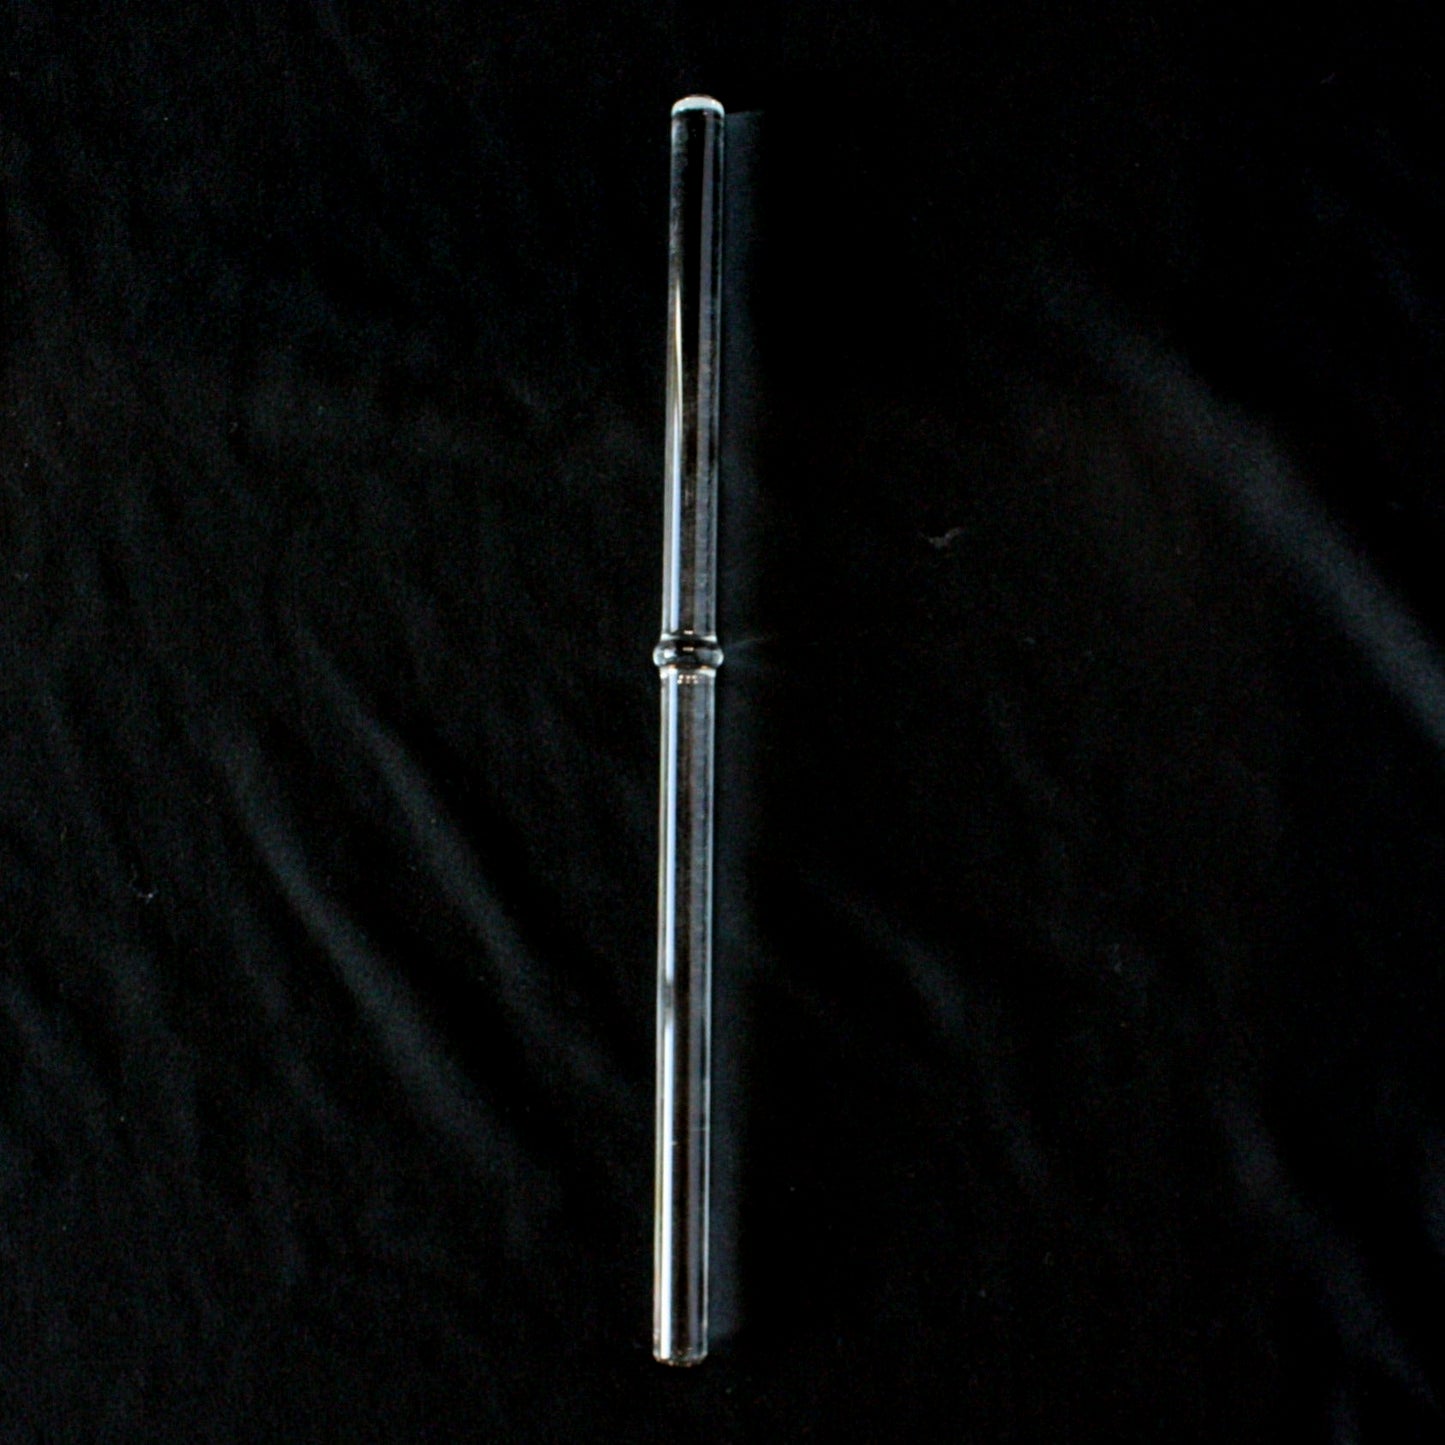 Solid Glass Rod w/ Stopper in Middle